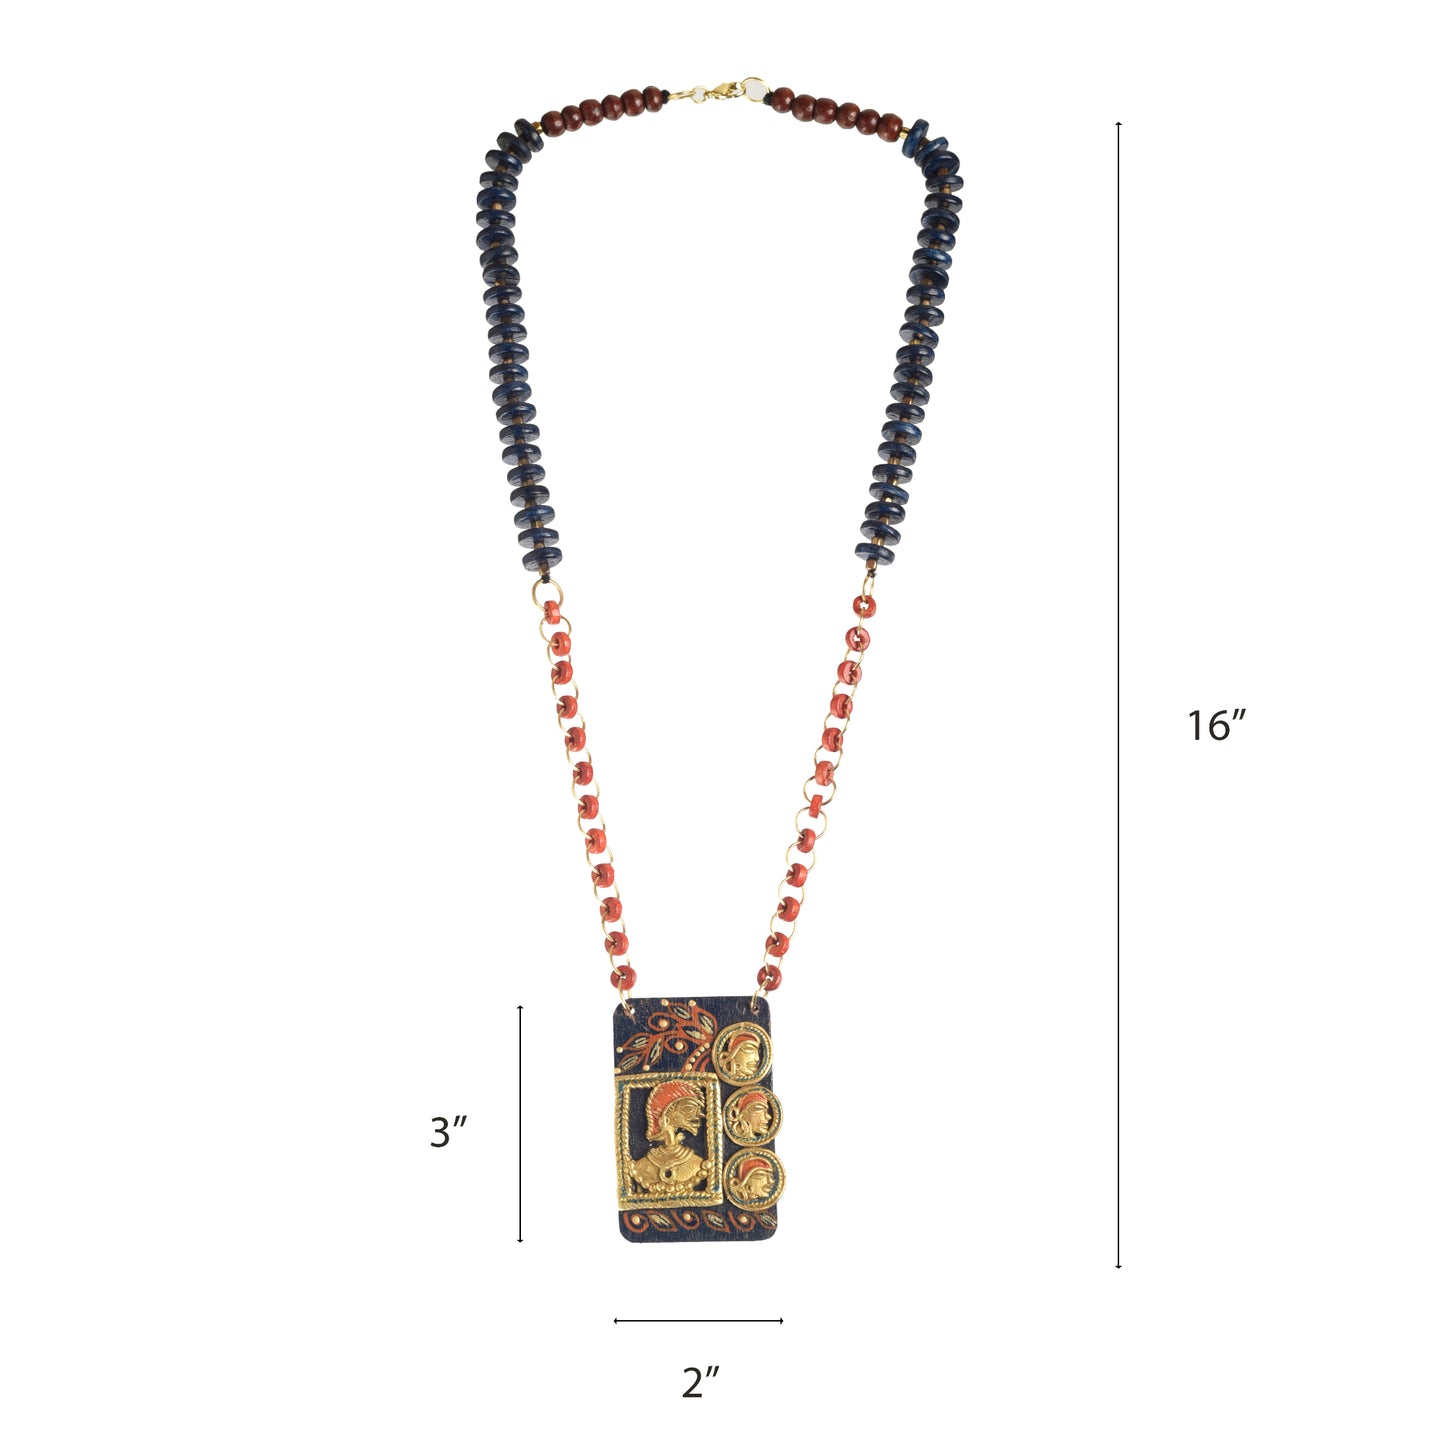 Kingdoms of Nile Handcrafted Necklace